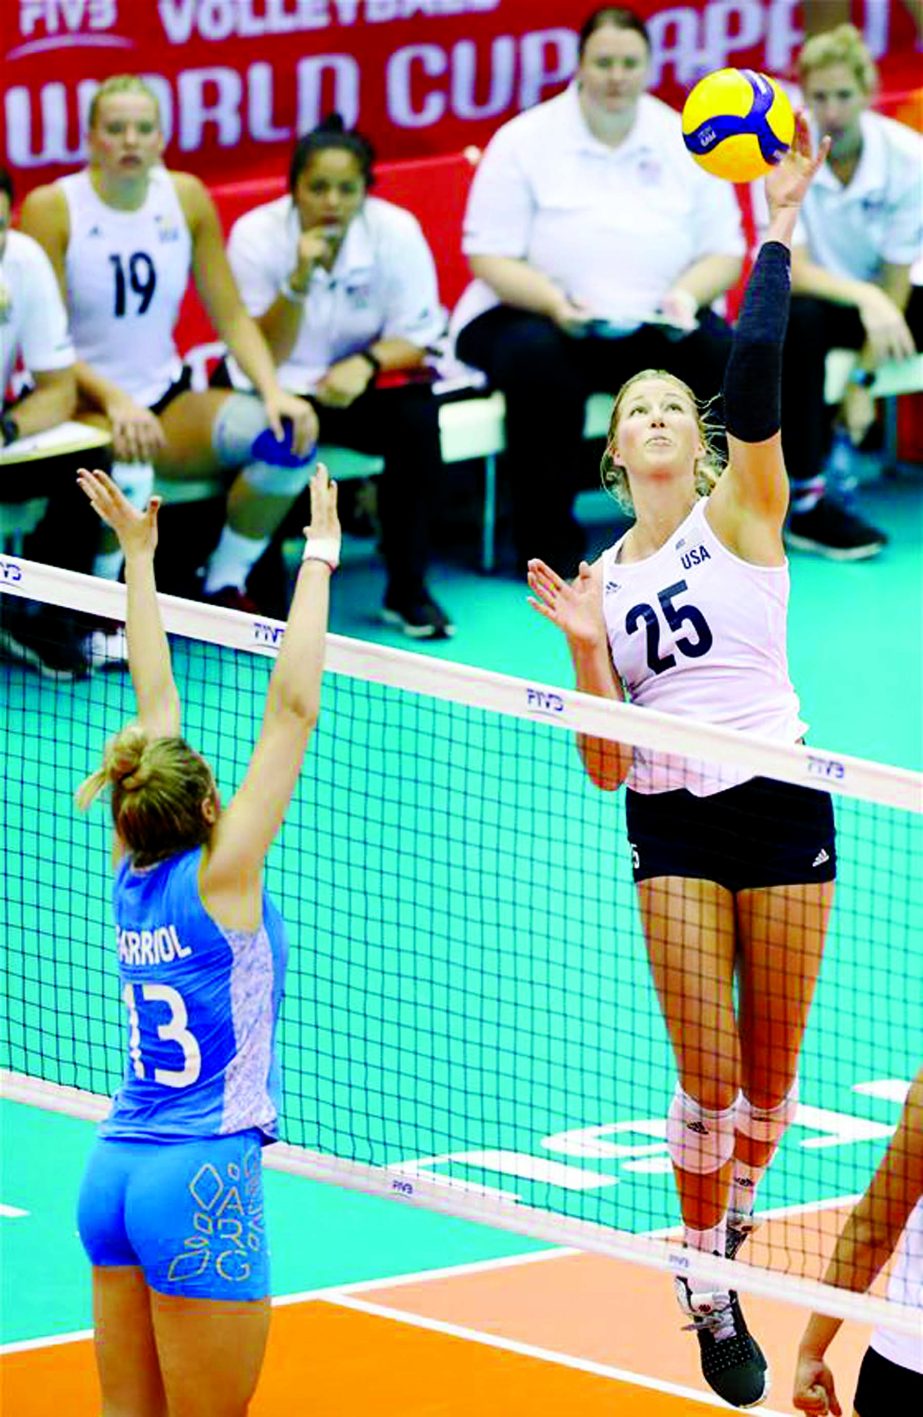 Karsta Lowe (right) of the United States spikes the ball during the Robin Round match between the United States and Argentina at 2019 Volleyball Women's World Cup in Hamamatsu, Japan on Monday.